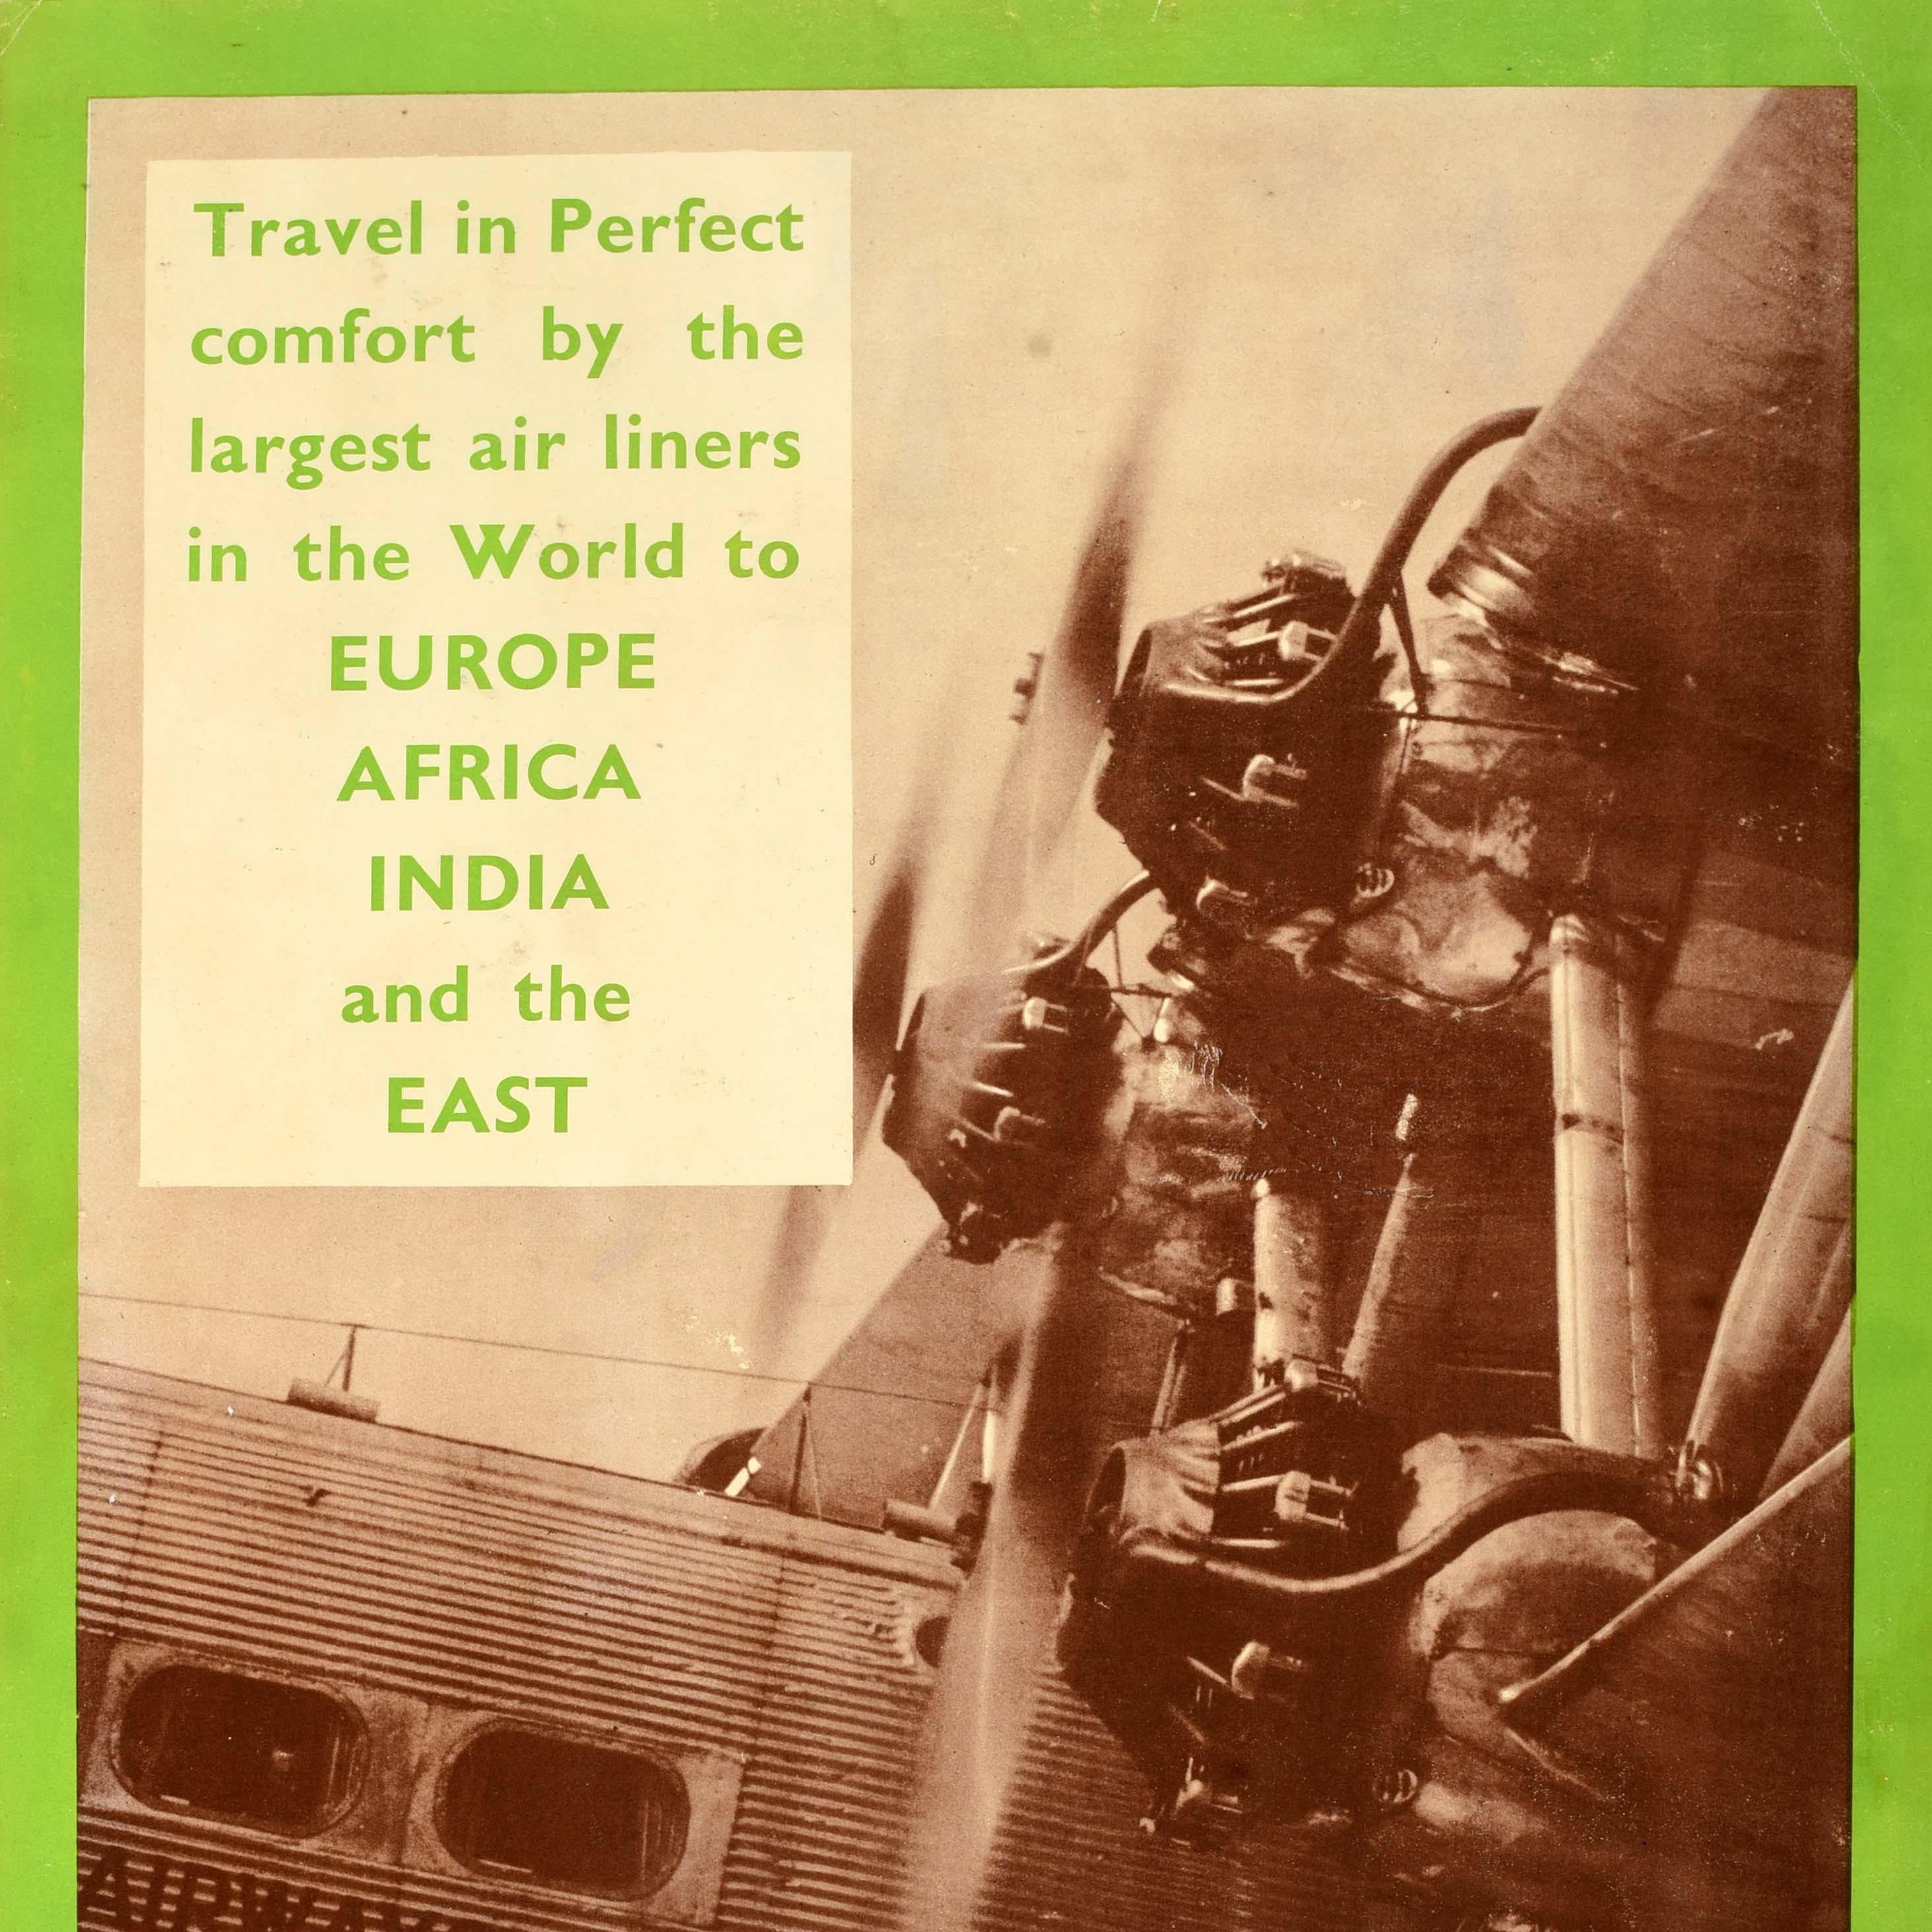 Original vintage travel advertising poster - Imperial Airways The British Air Line Travel in perfect comfort by the largest air liners in the World to Europe Africa India and the East - featuring a sepia-toned photograph of a man in uniform standing